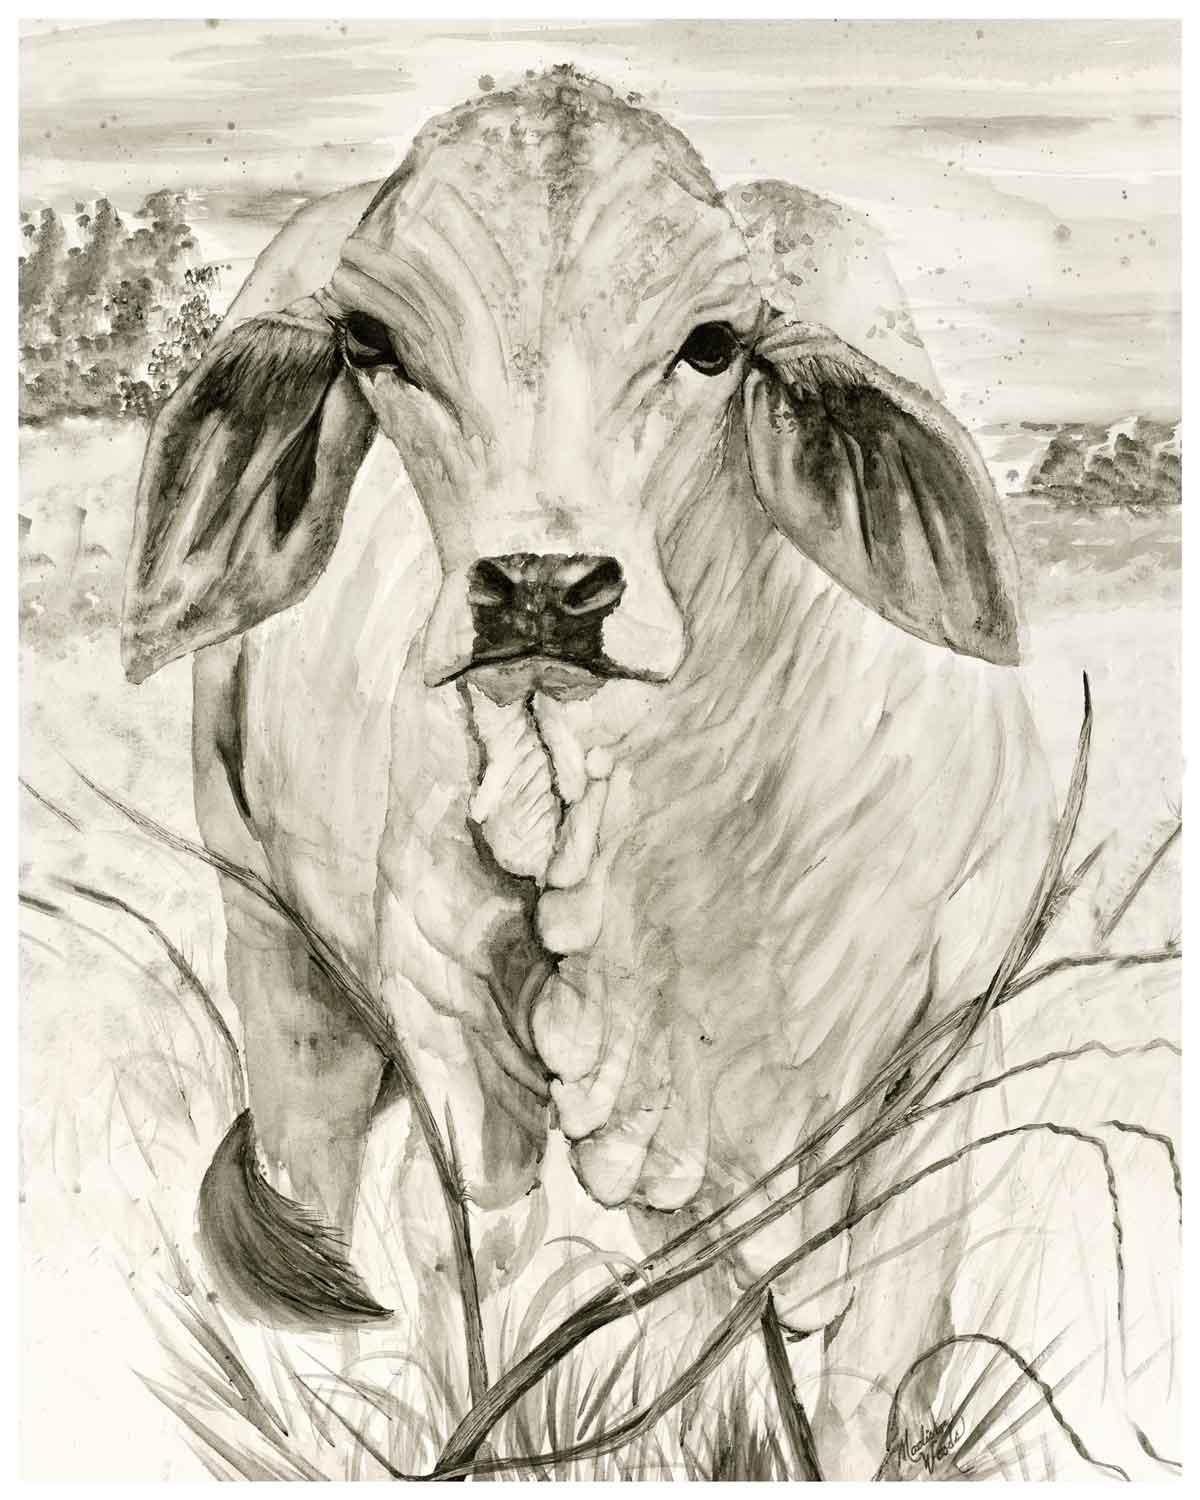 Brahman cow painted in bone pigments by Madison Woods. She loves to share the awe at the possibility of things like this.